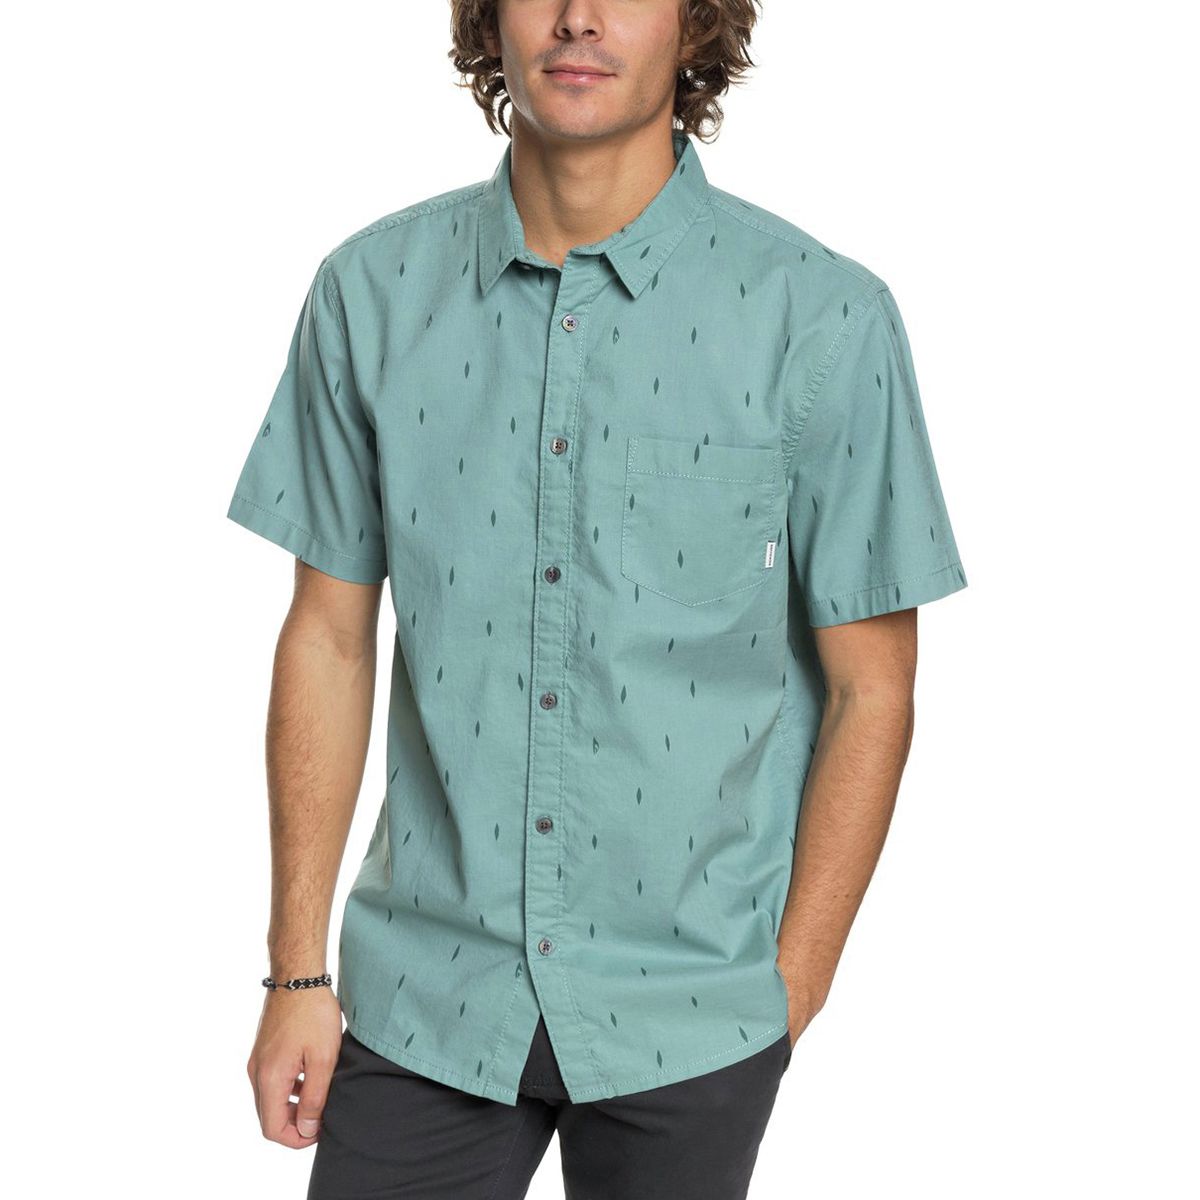 Quiksilver Abstract Boards Shirt - Men's - Clothing